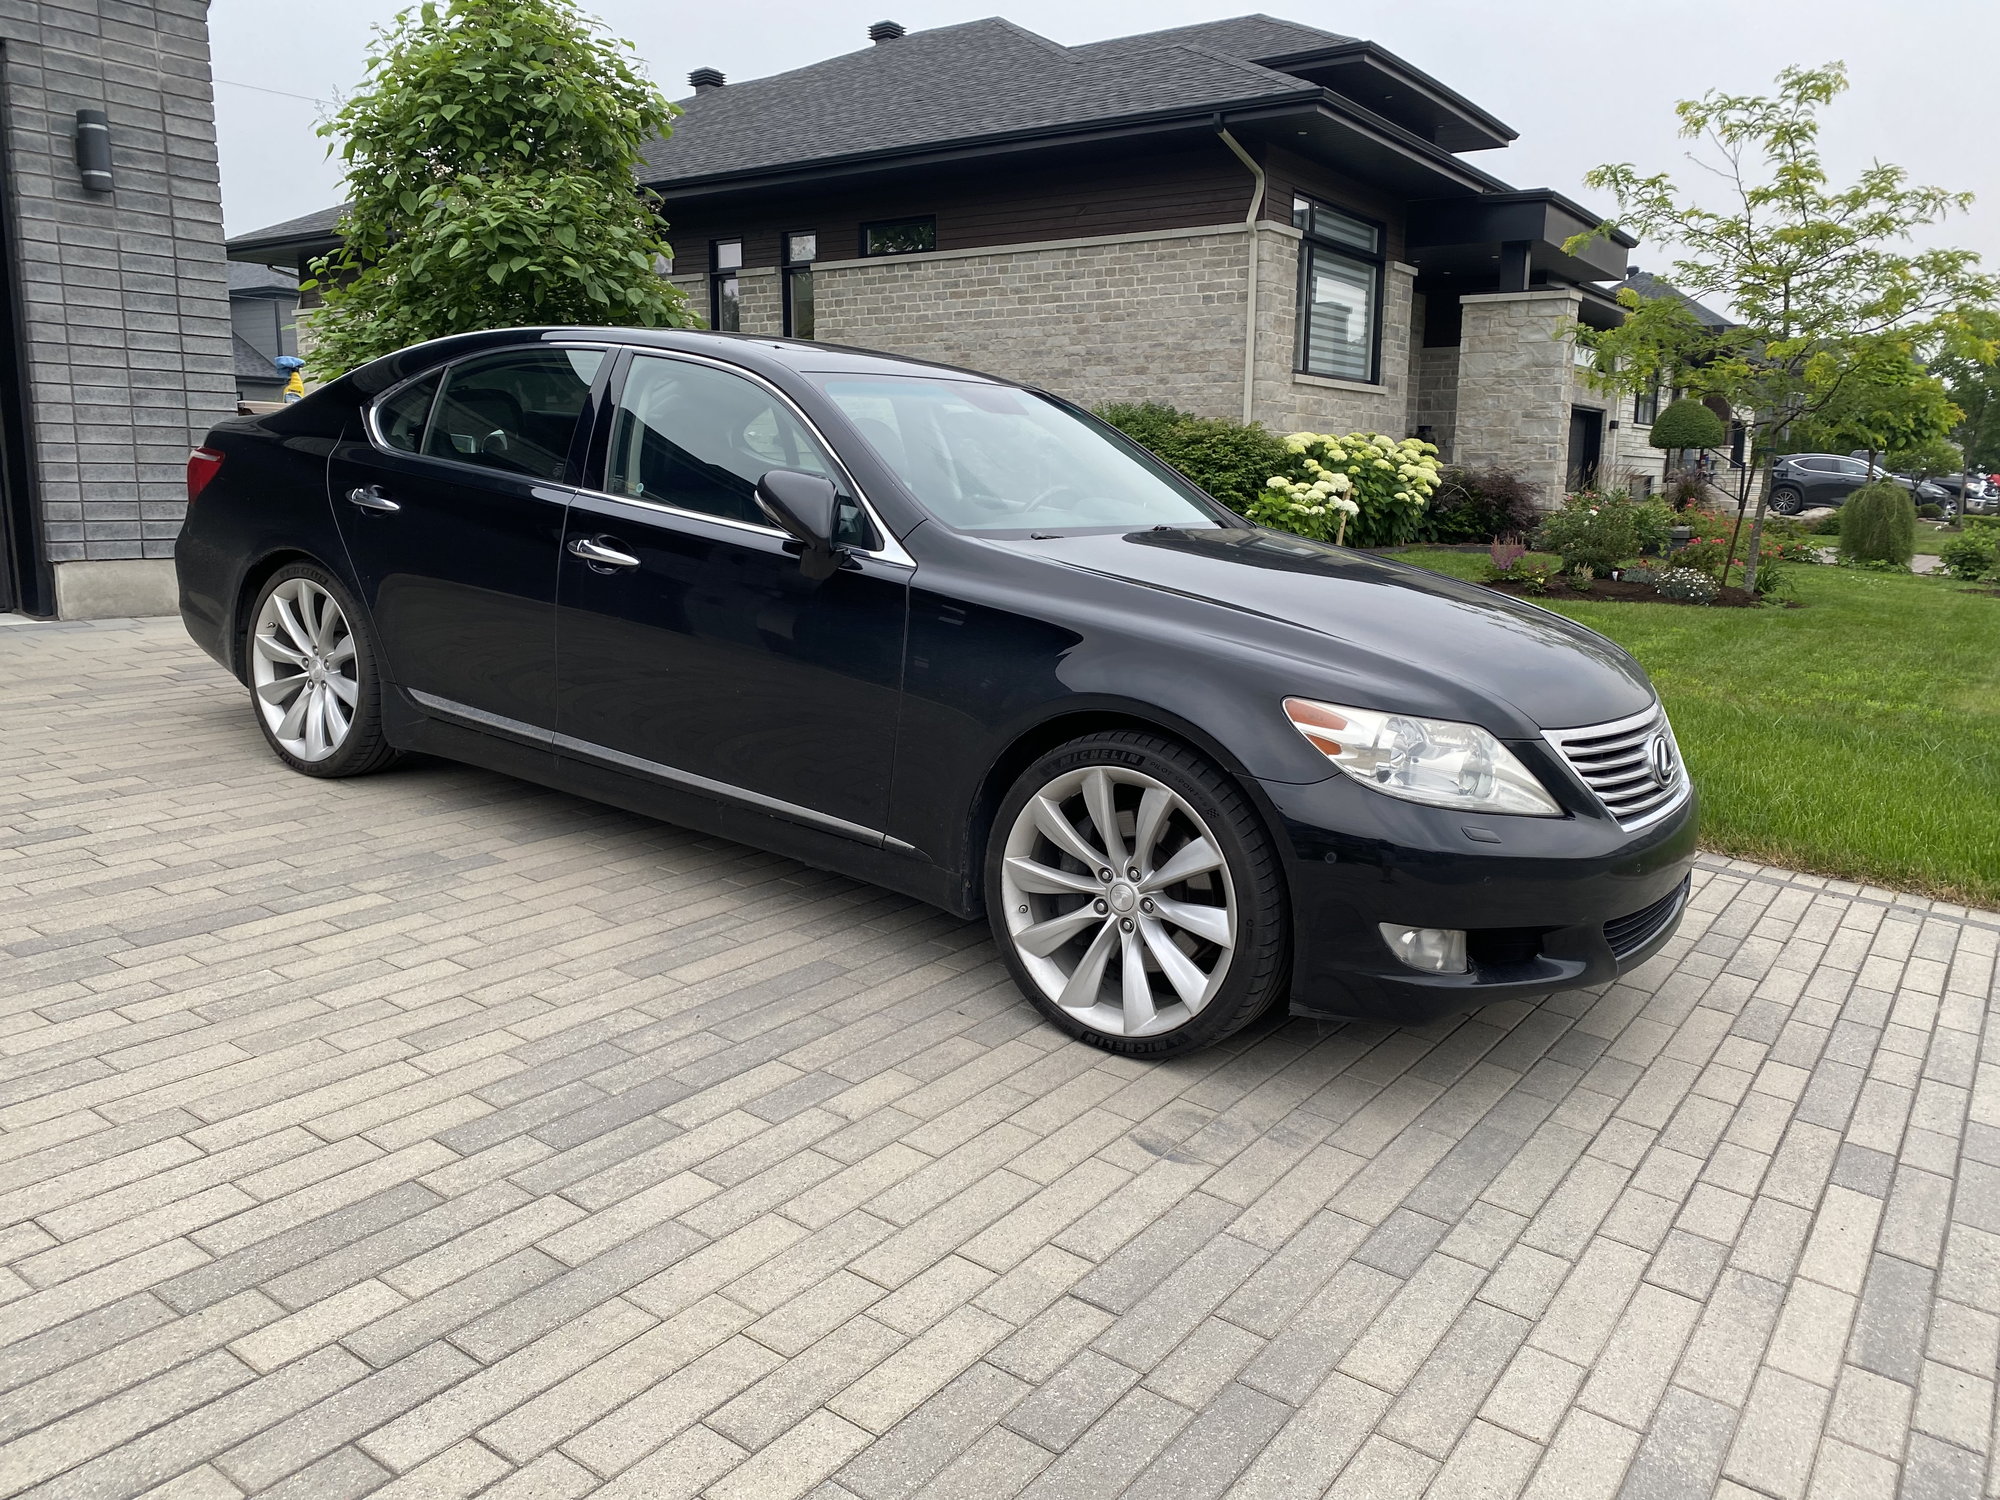 Wheels and Tires/Axles - FS: LS460 Hardware for Tesla Wheels (Spacers and Hub Centric Rings) - Used - 2007 to 2014 Lexus LS460 - Montreal, QC J4Z, Canada